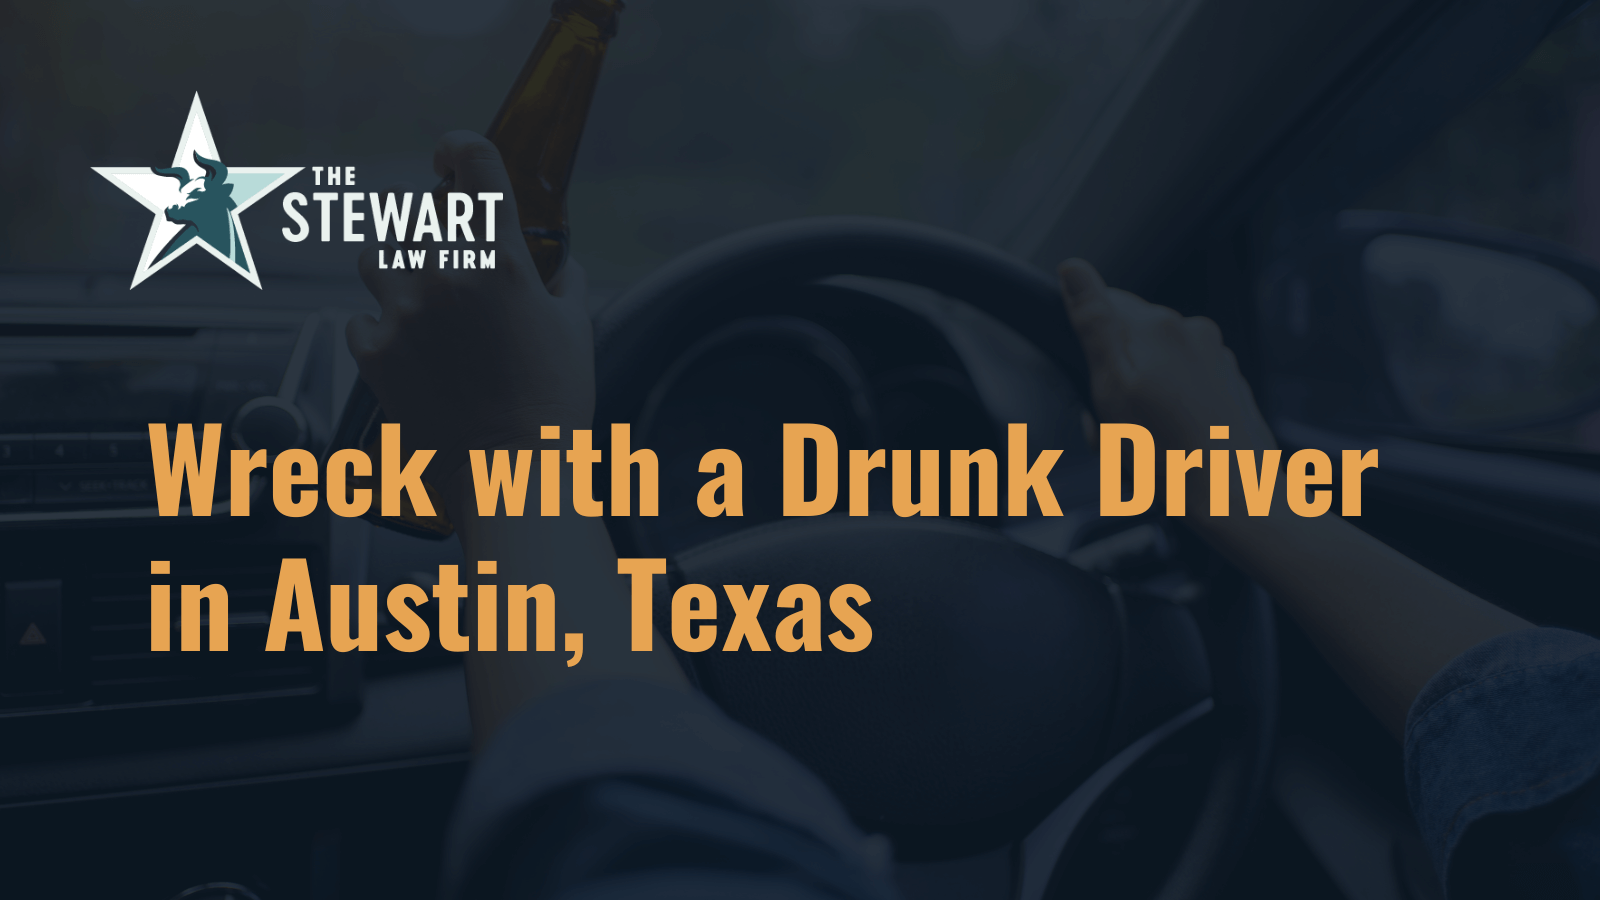 Wreck with a Drunk Driver in Austin, Texas - the stephen stewart law firm - austin texas personal injury lawyer